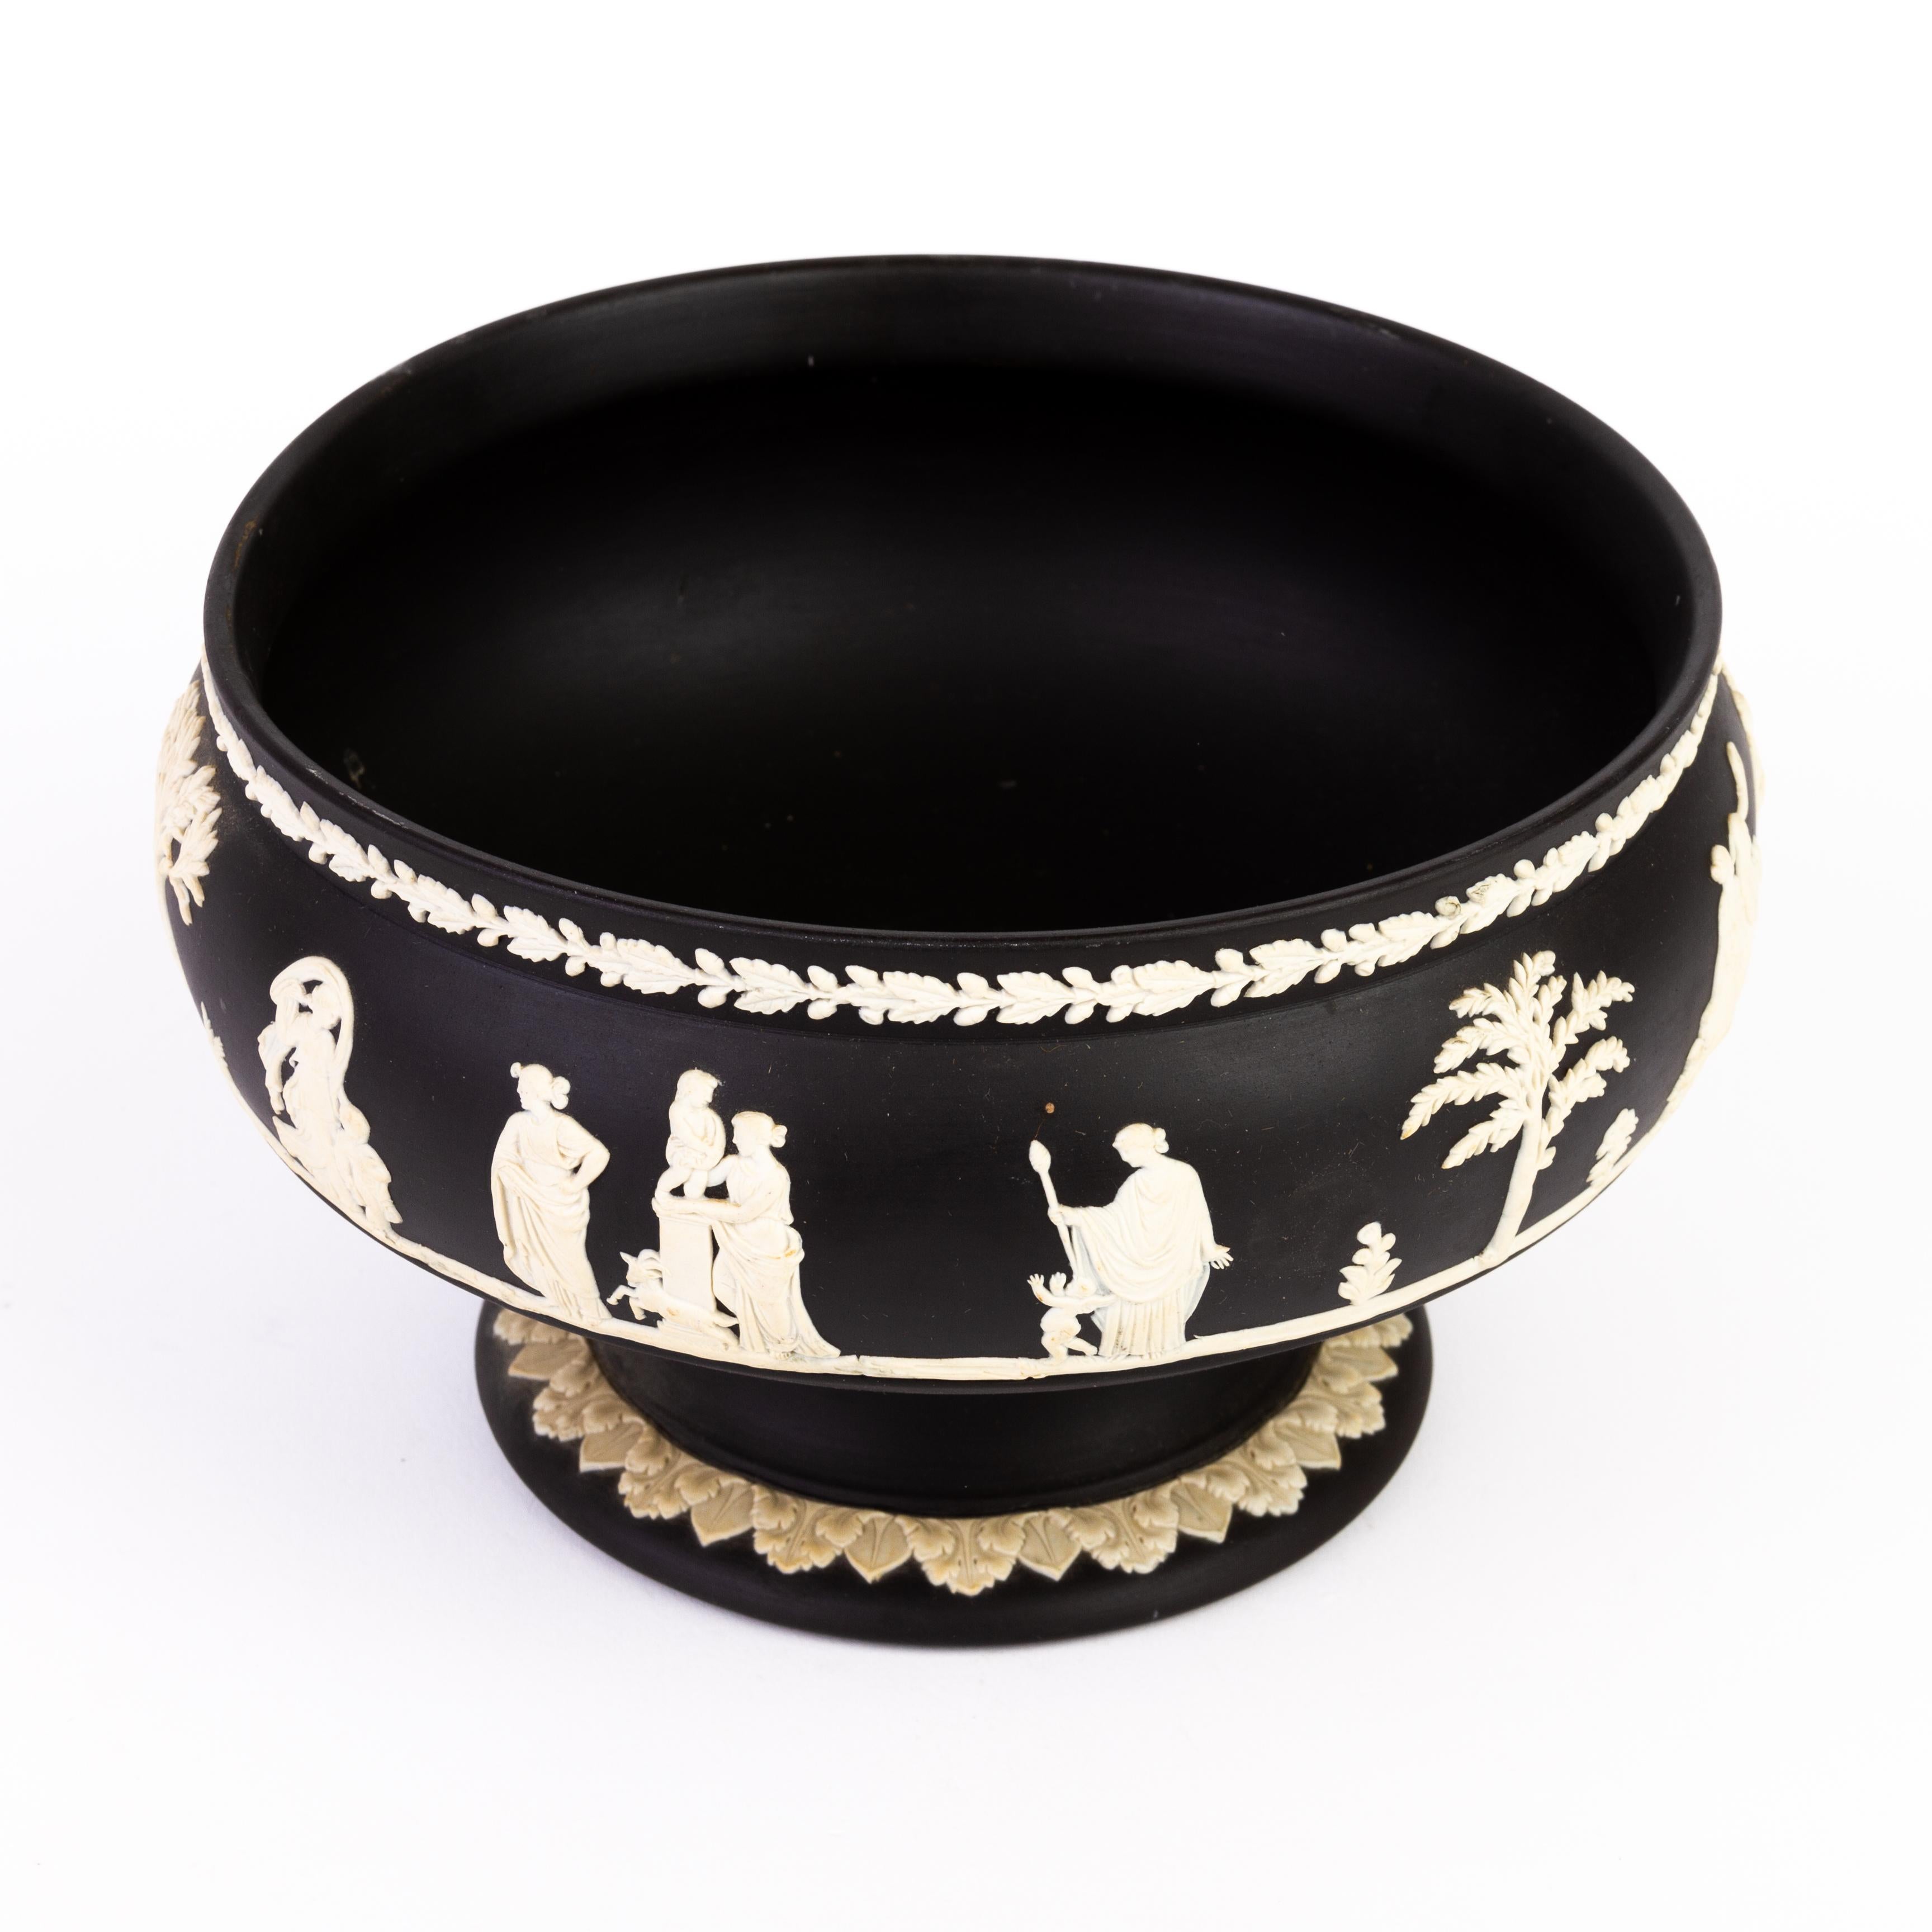 From a private collection.
Free international shipping
Wedgwood Black Basalt Neoclassical Comport Centrepiece